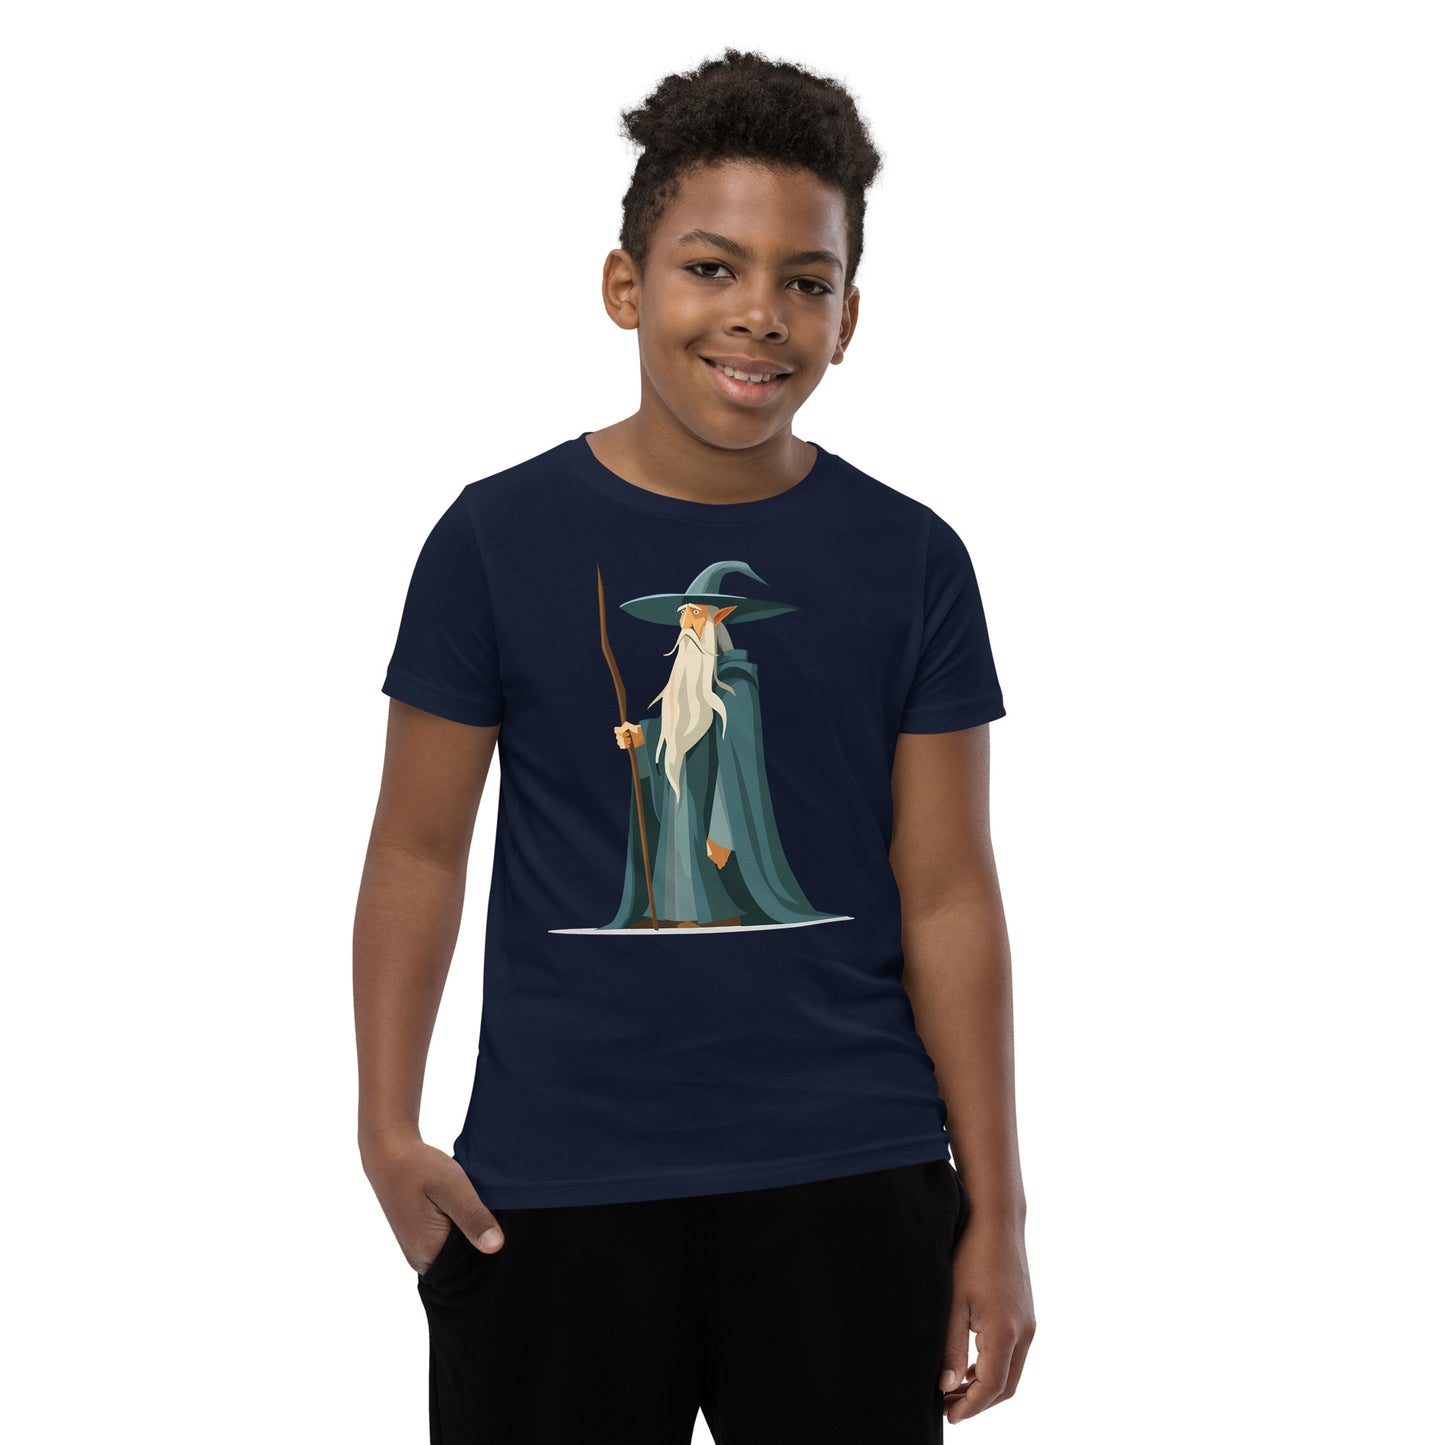 Boy with a navy T-shirt with a picture of a magician